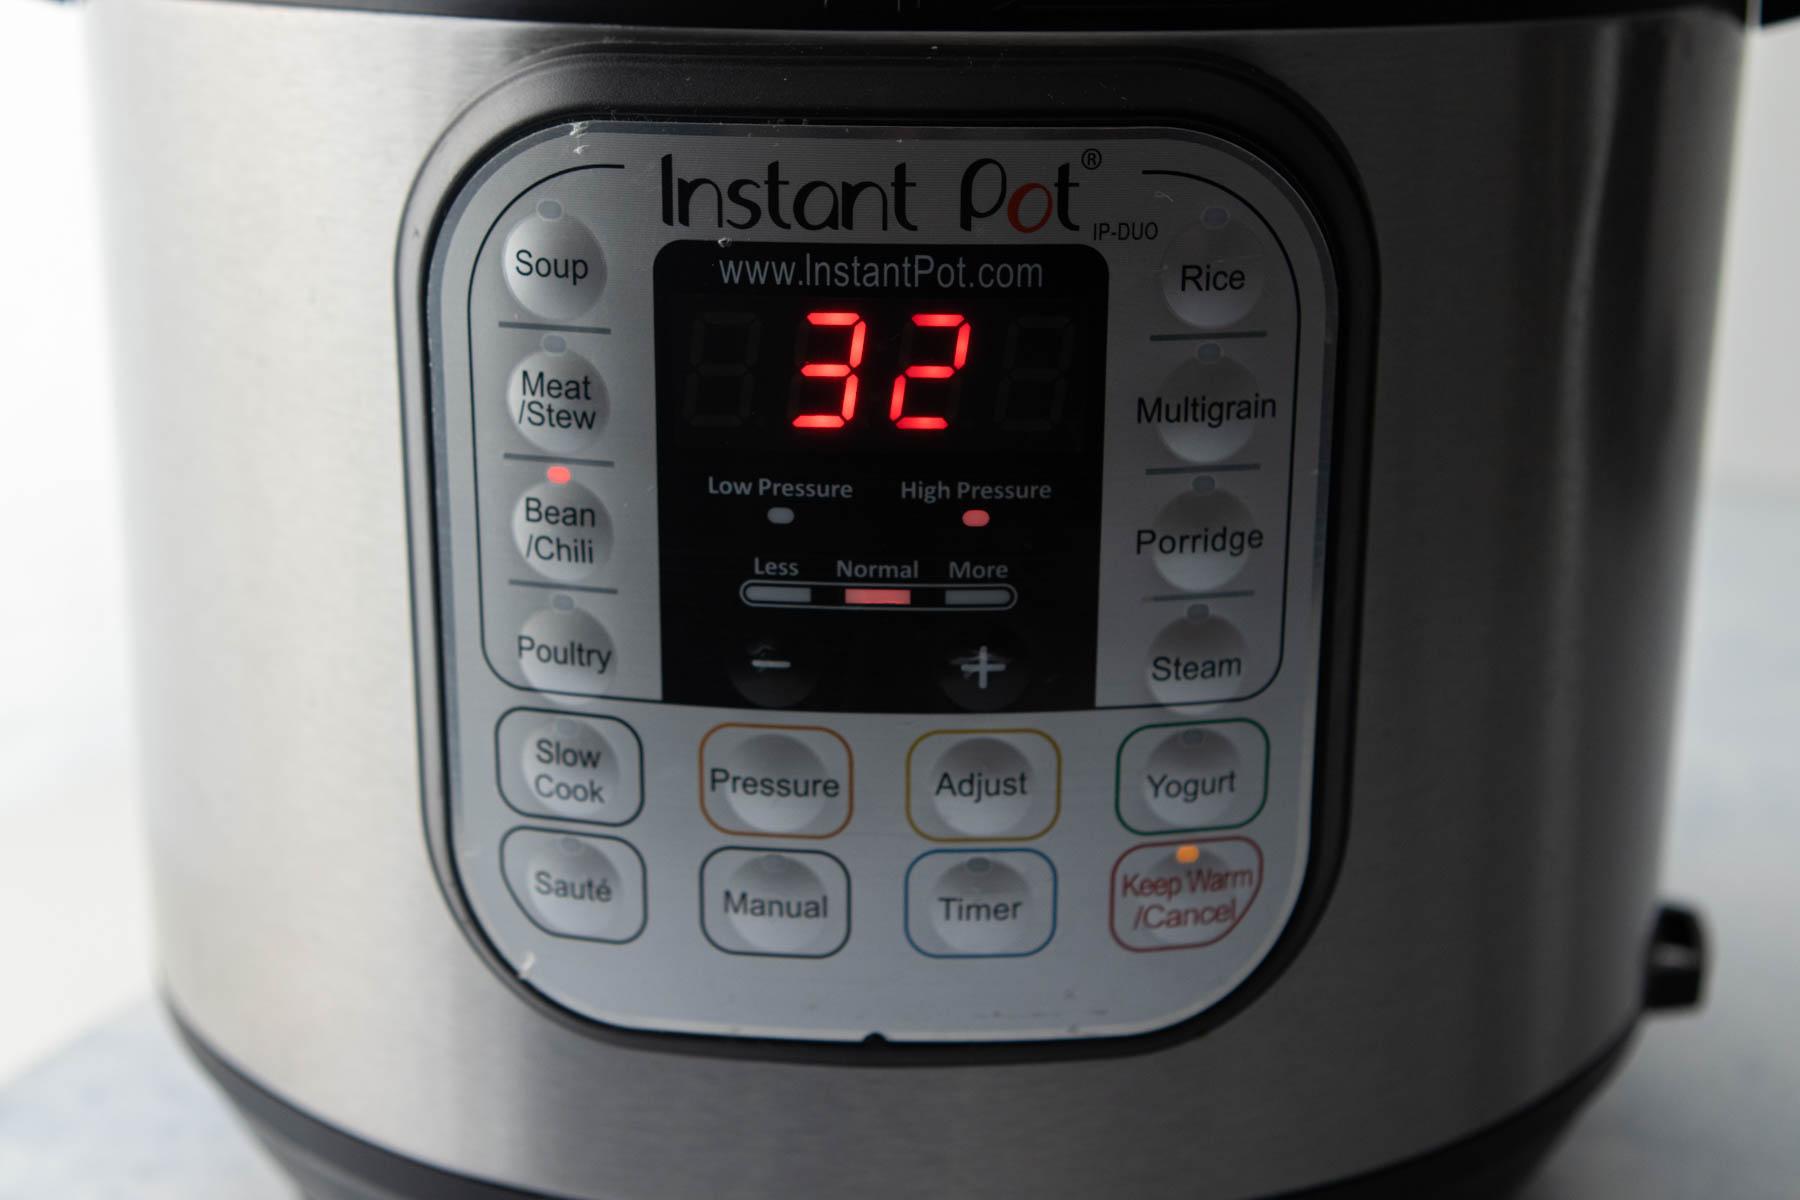 Instant Pot settings, with number 32 on display